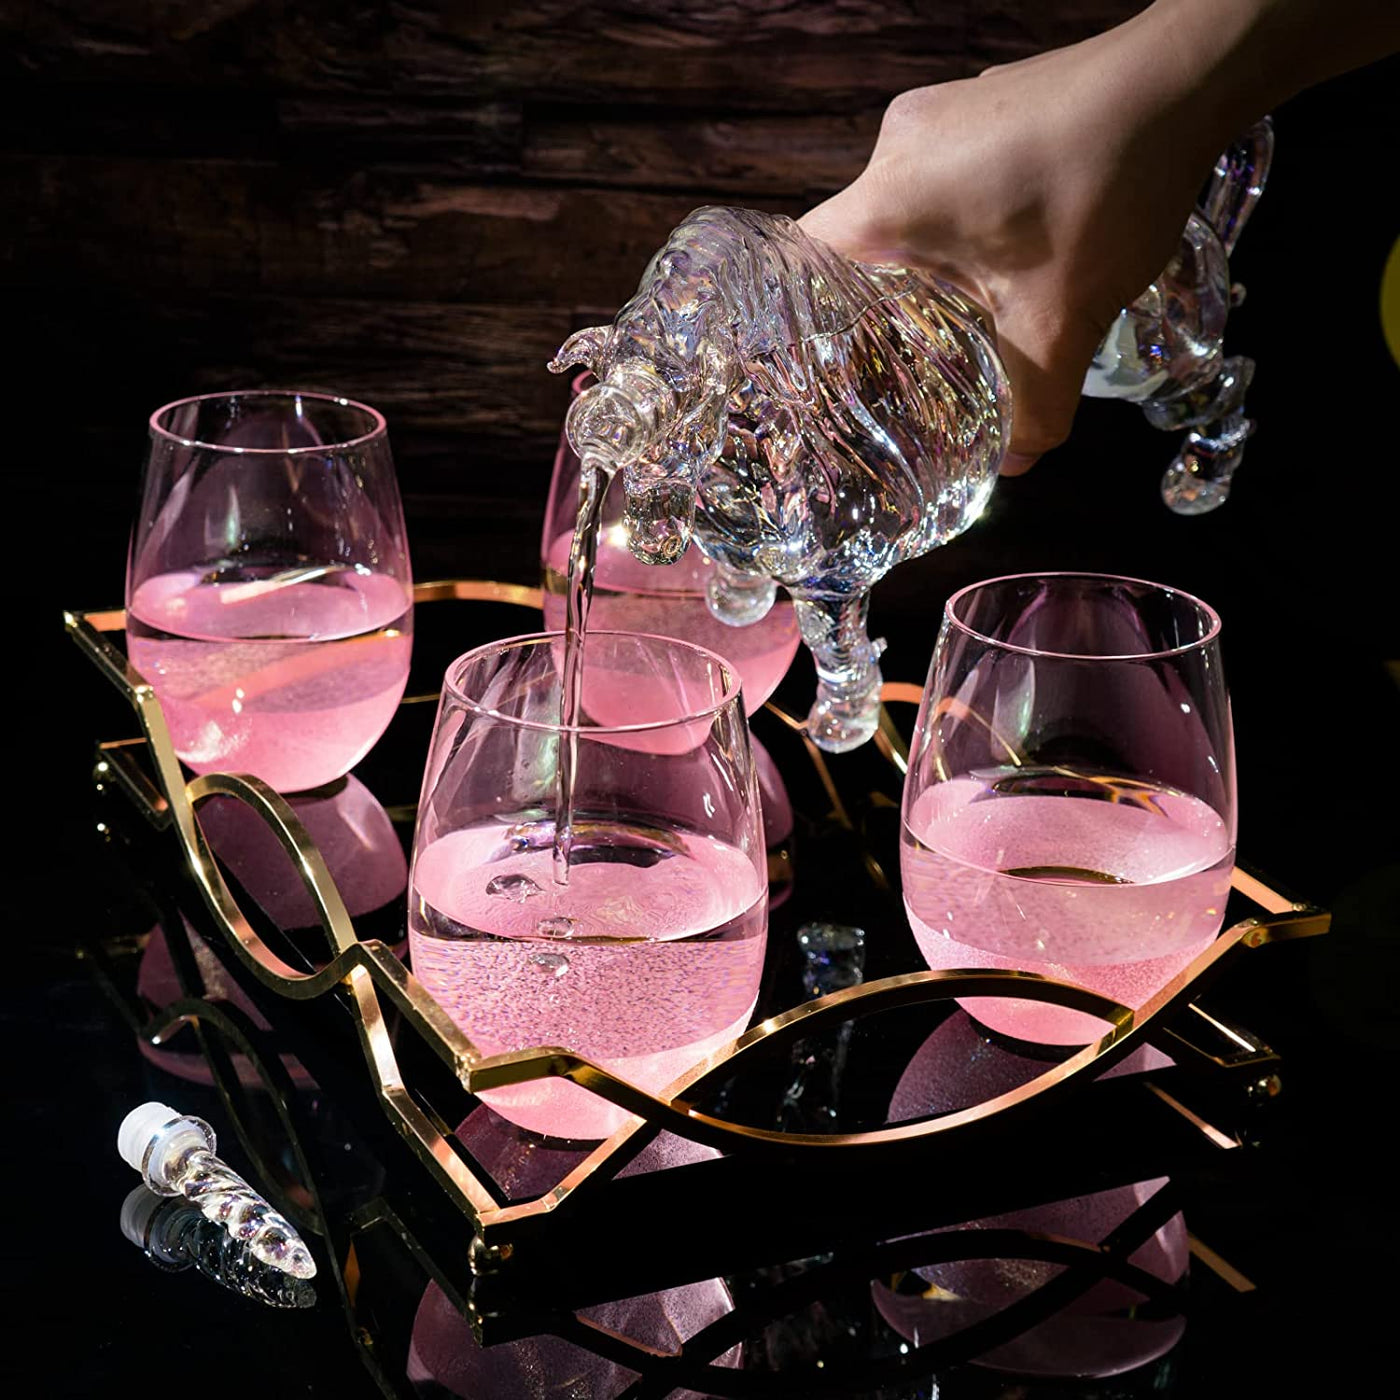 Iridescent Unicorn Wine Whiskey Decanter Set 750ml With 4 Pink Sparkle Glasses for Wine, Whiskey, Scotch, Tequila or Any Drink by The Wine Savant - Unicorn Gifts, Unicorn Lovers, 14" L, 10" W, 11" H by The Wine Savant